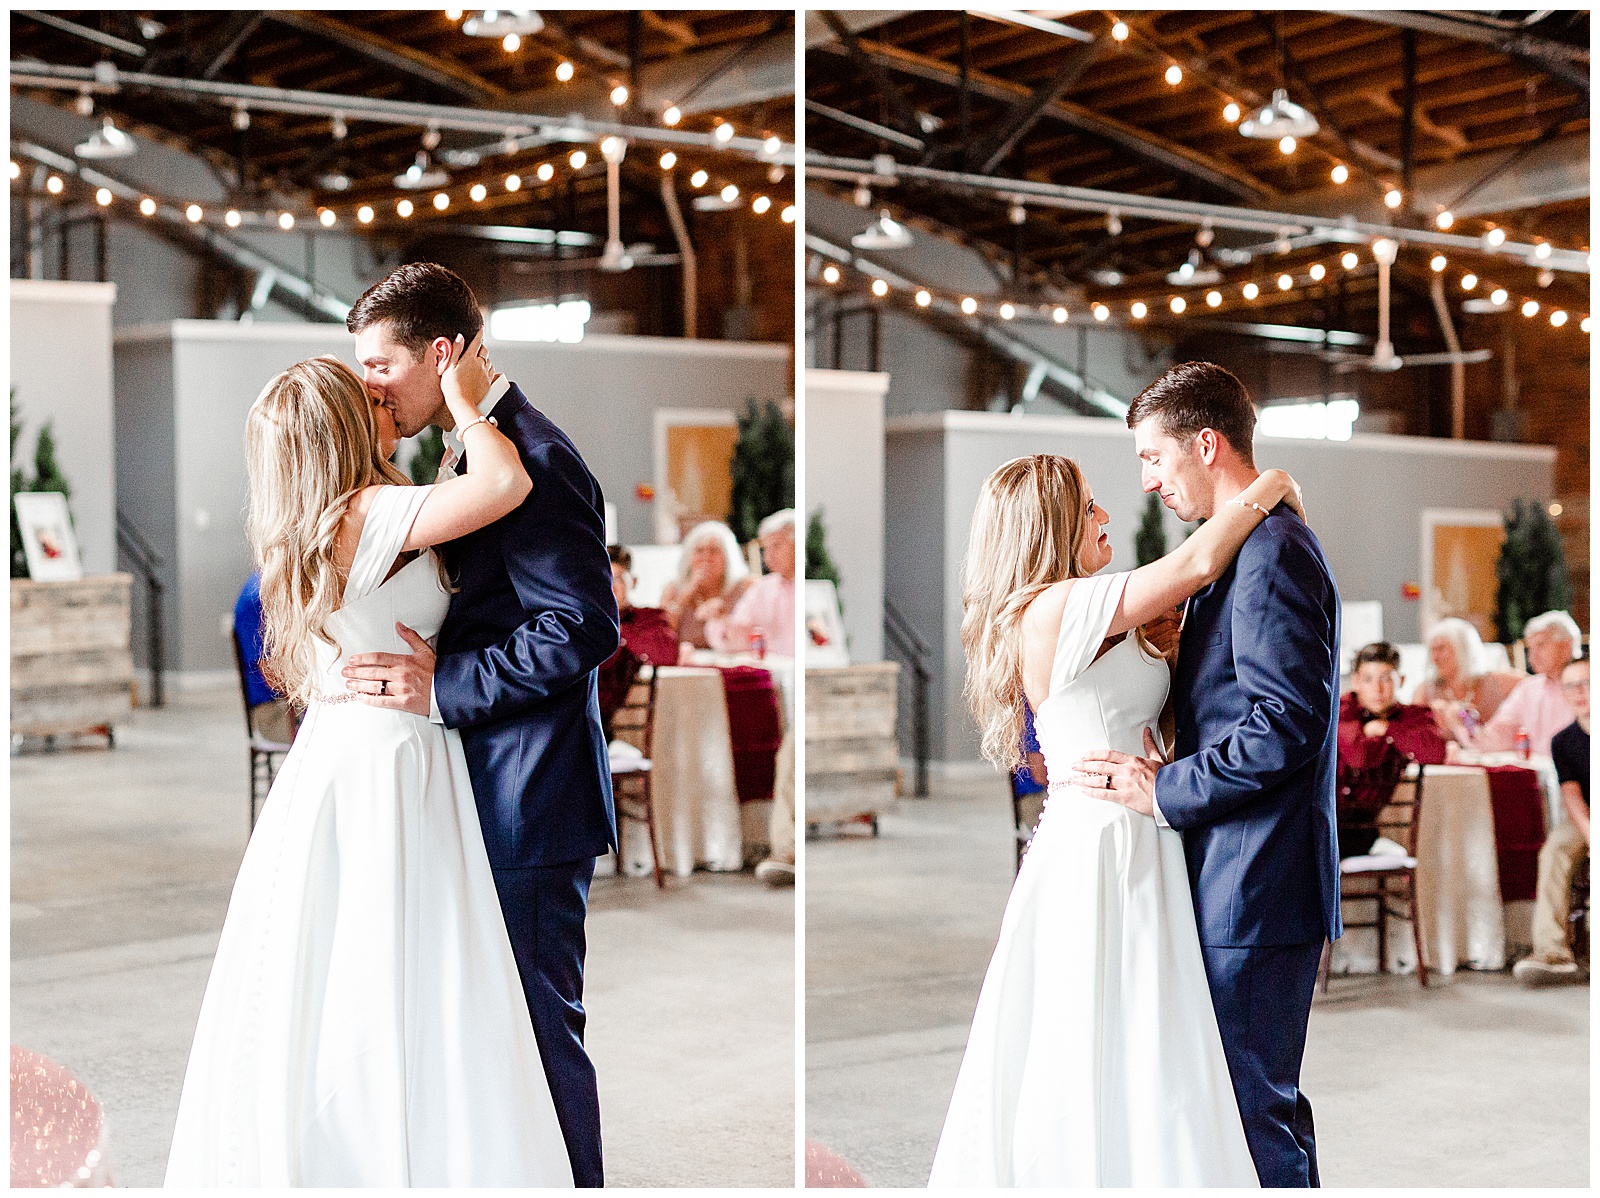 Stunning Modern bride and groom first dance in indoor fairy light venue from Summer Wedding in Charlotte, NC | Check out the full wedding at KevynDixonPhoto.com